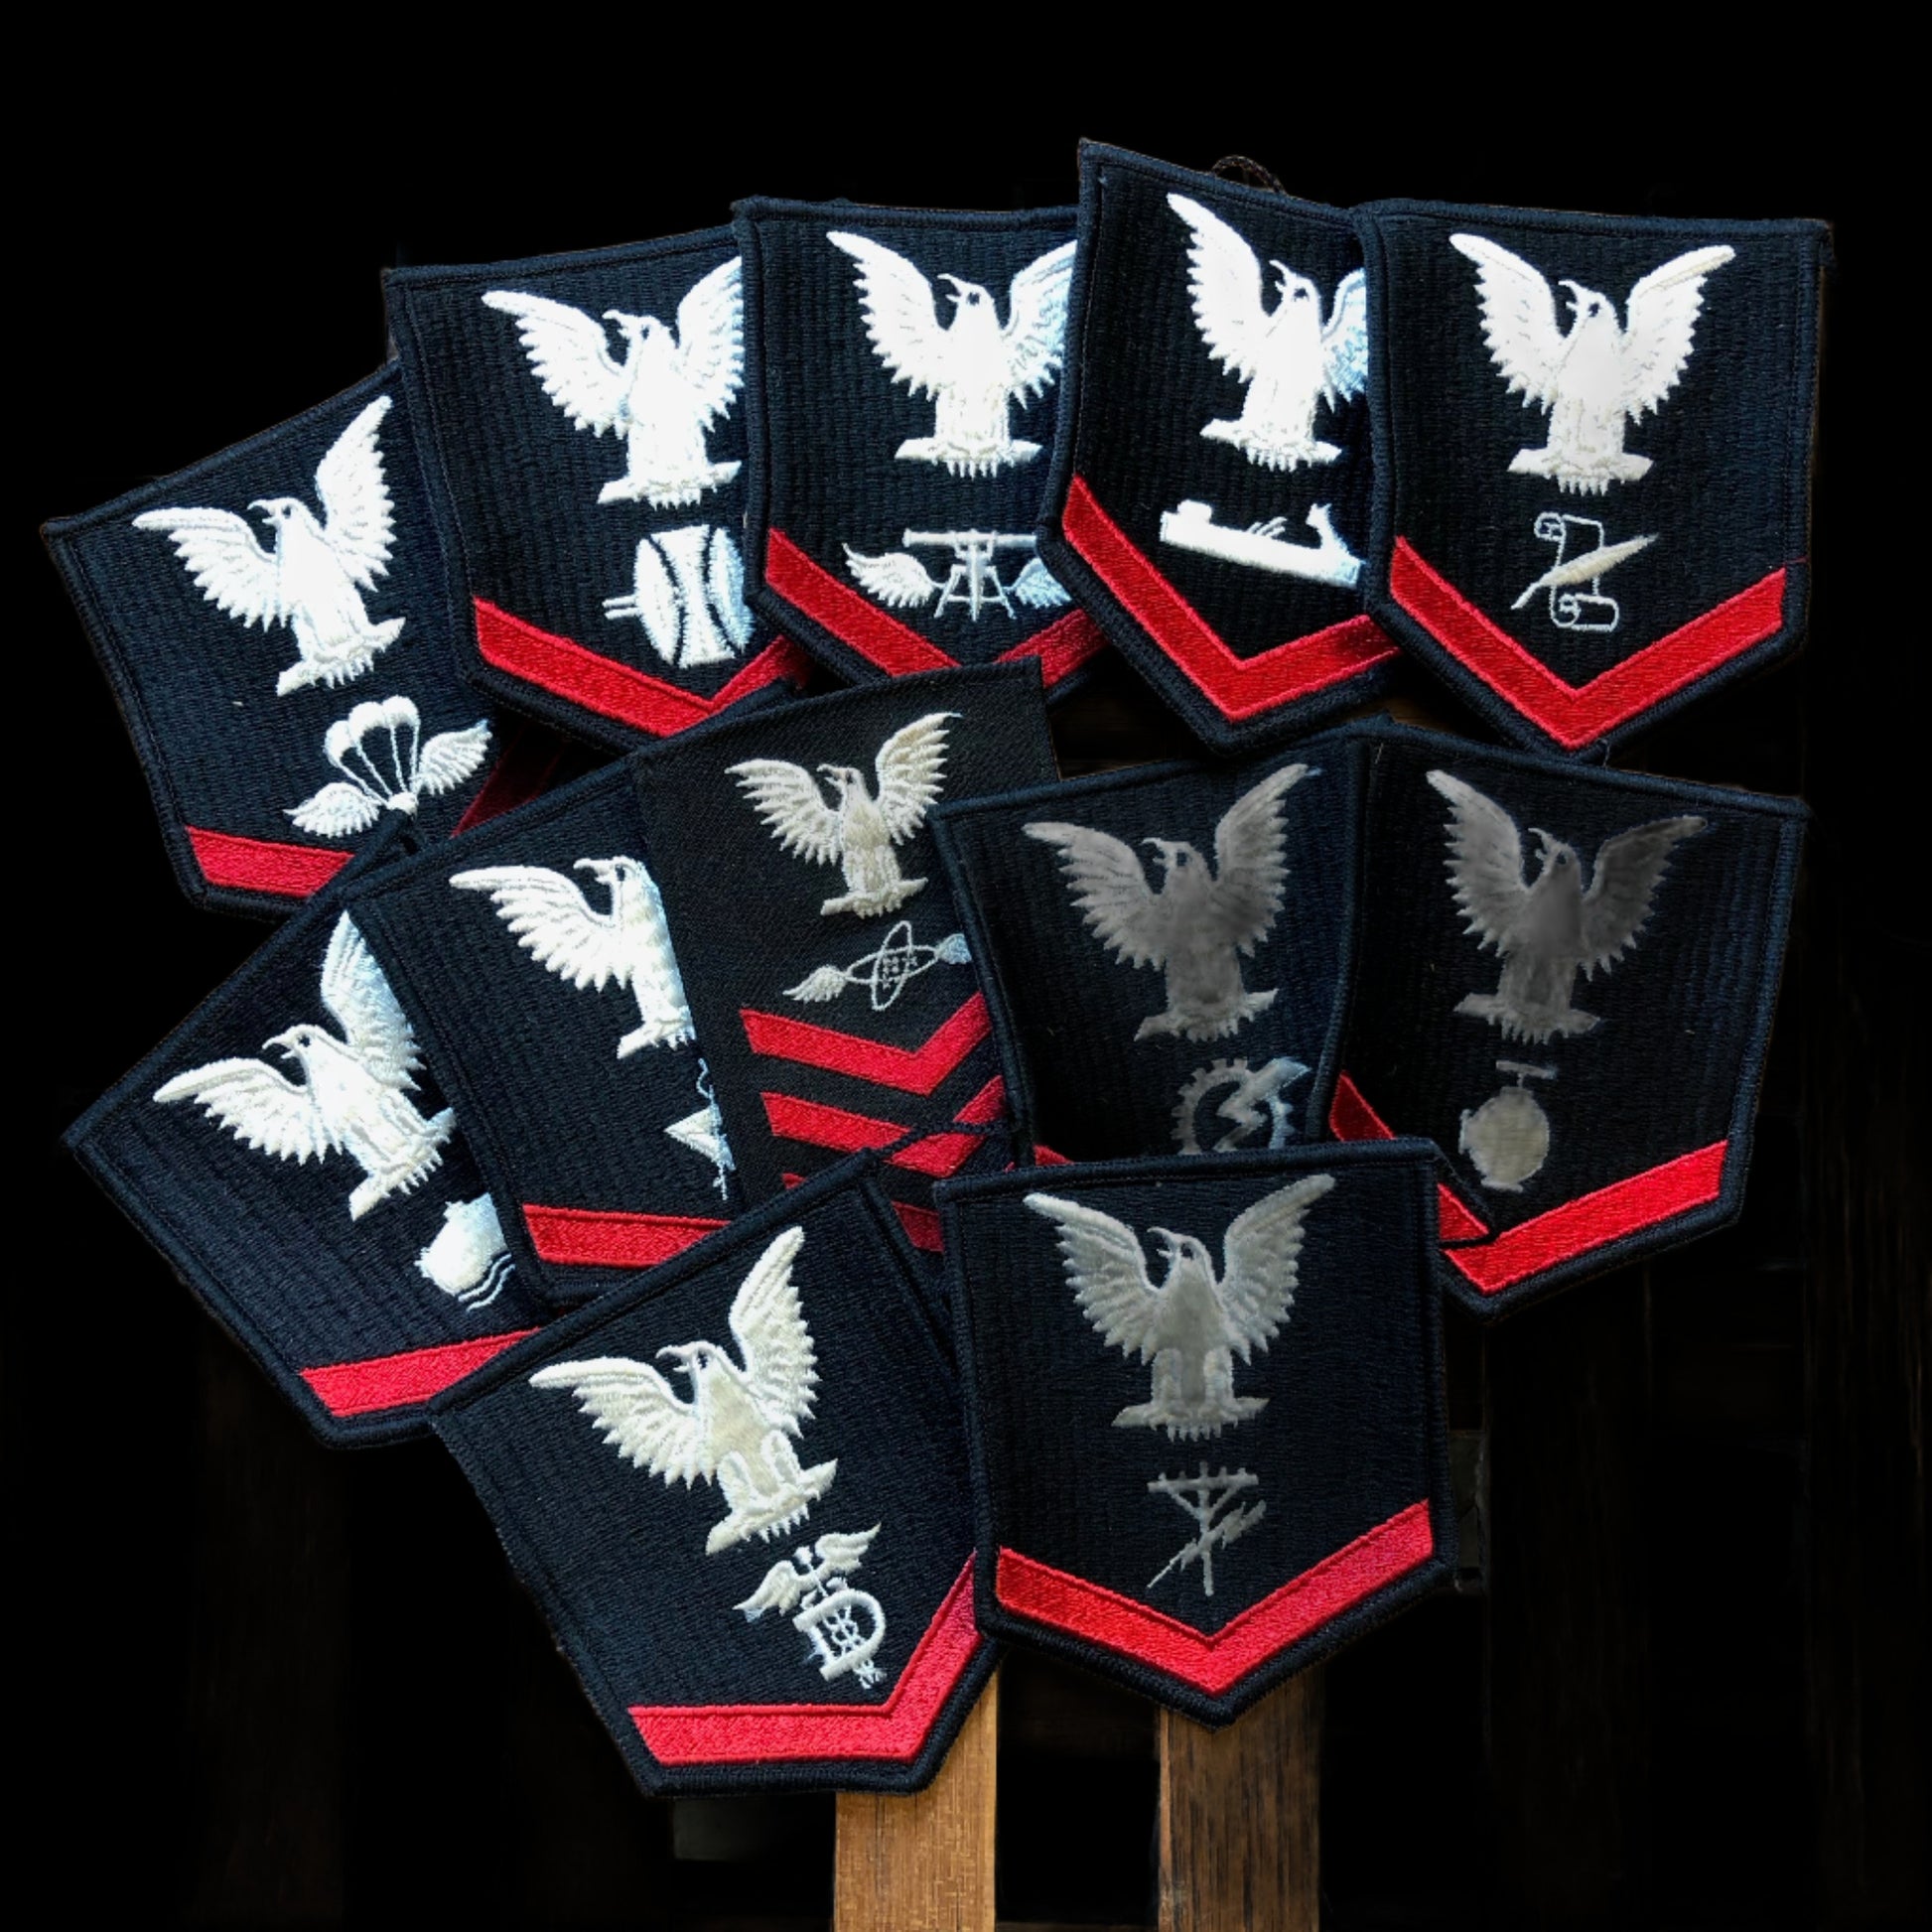 Navy Rating Patches - Annapolis Maritime Antiques